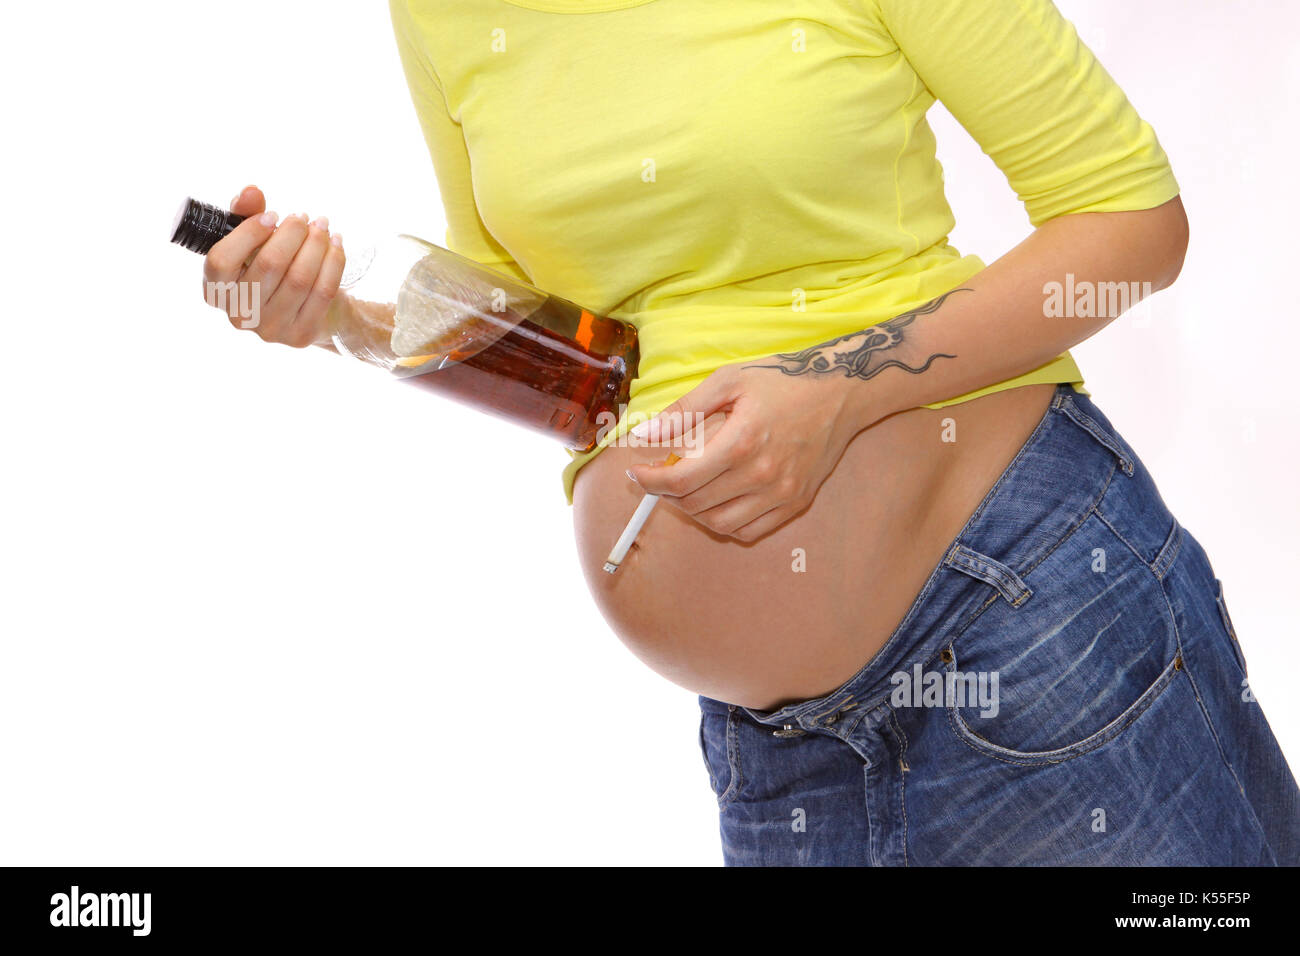 Pregnant woman with baby belly drinks alcohol and smokes a cigarette Stock Photo